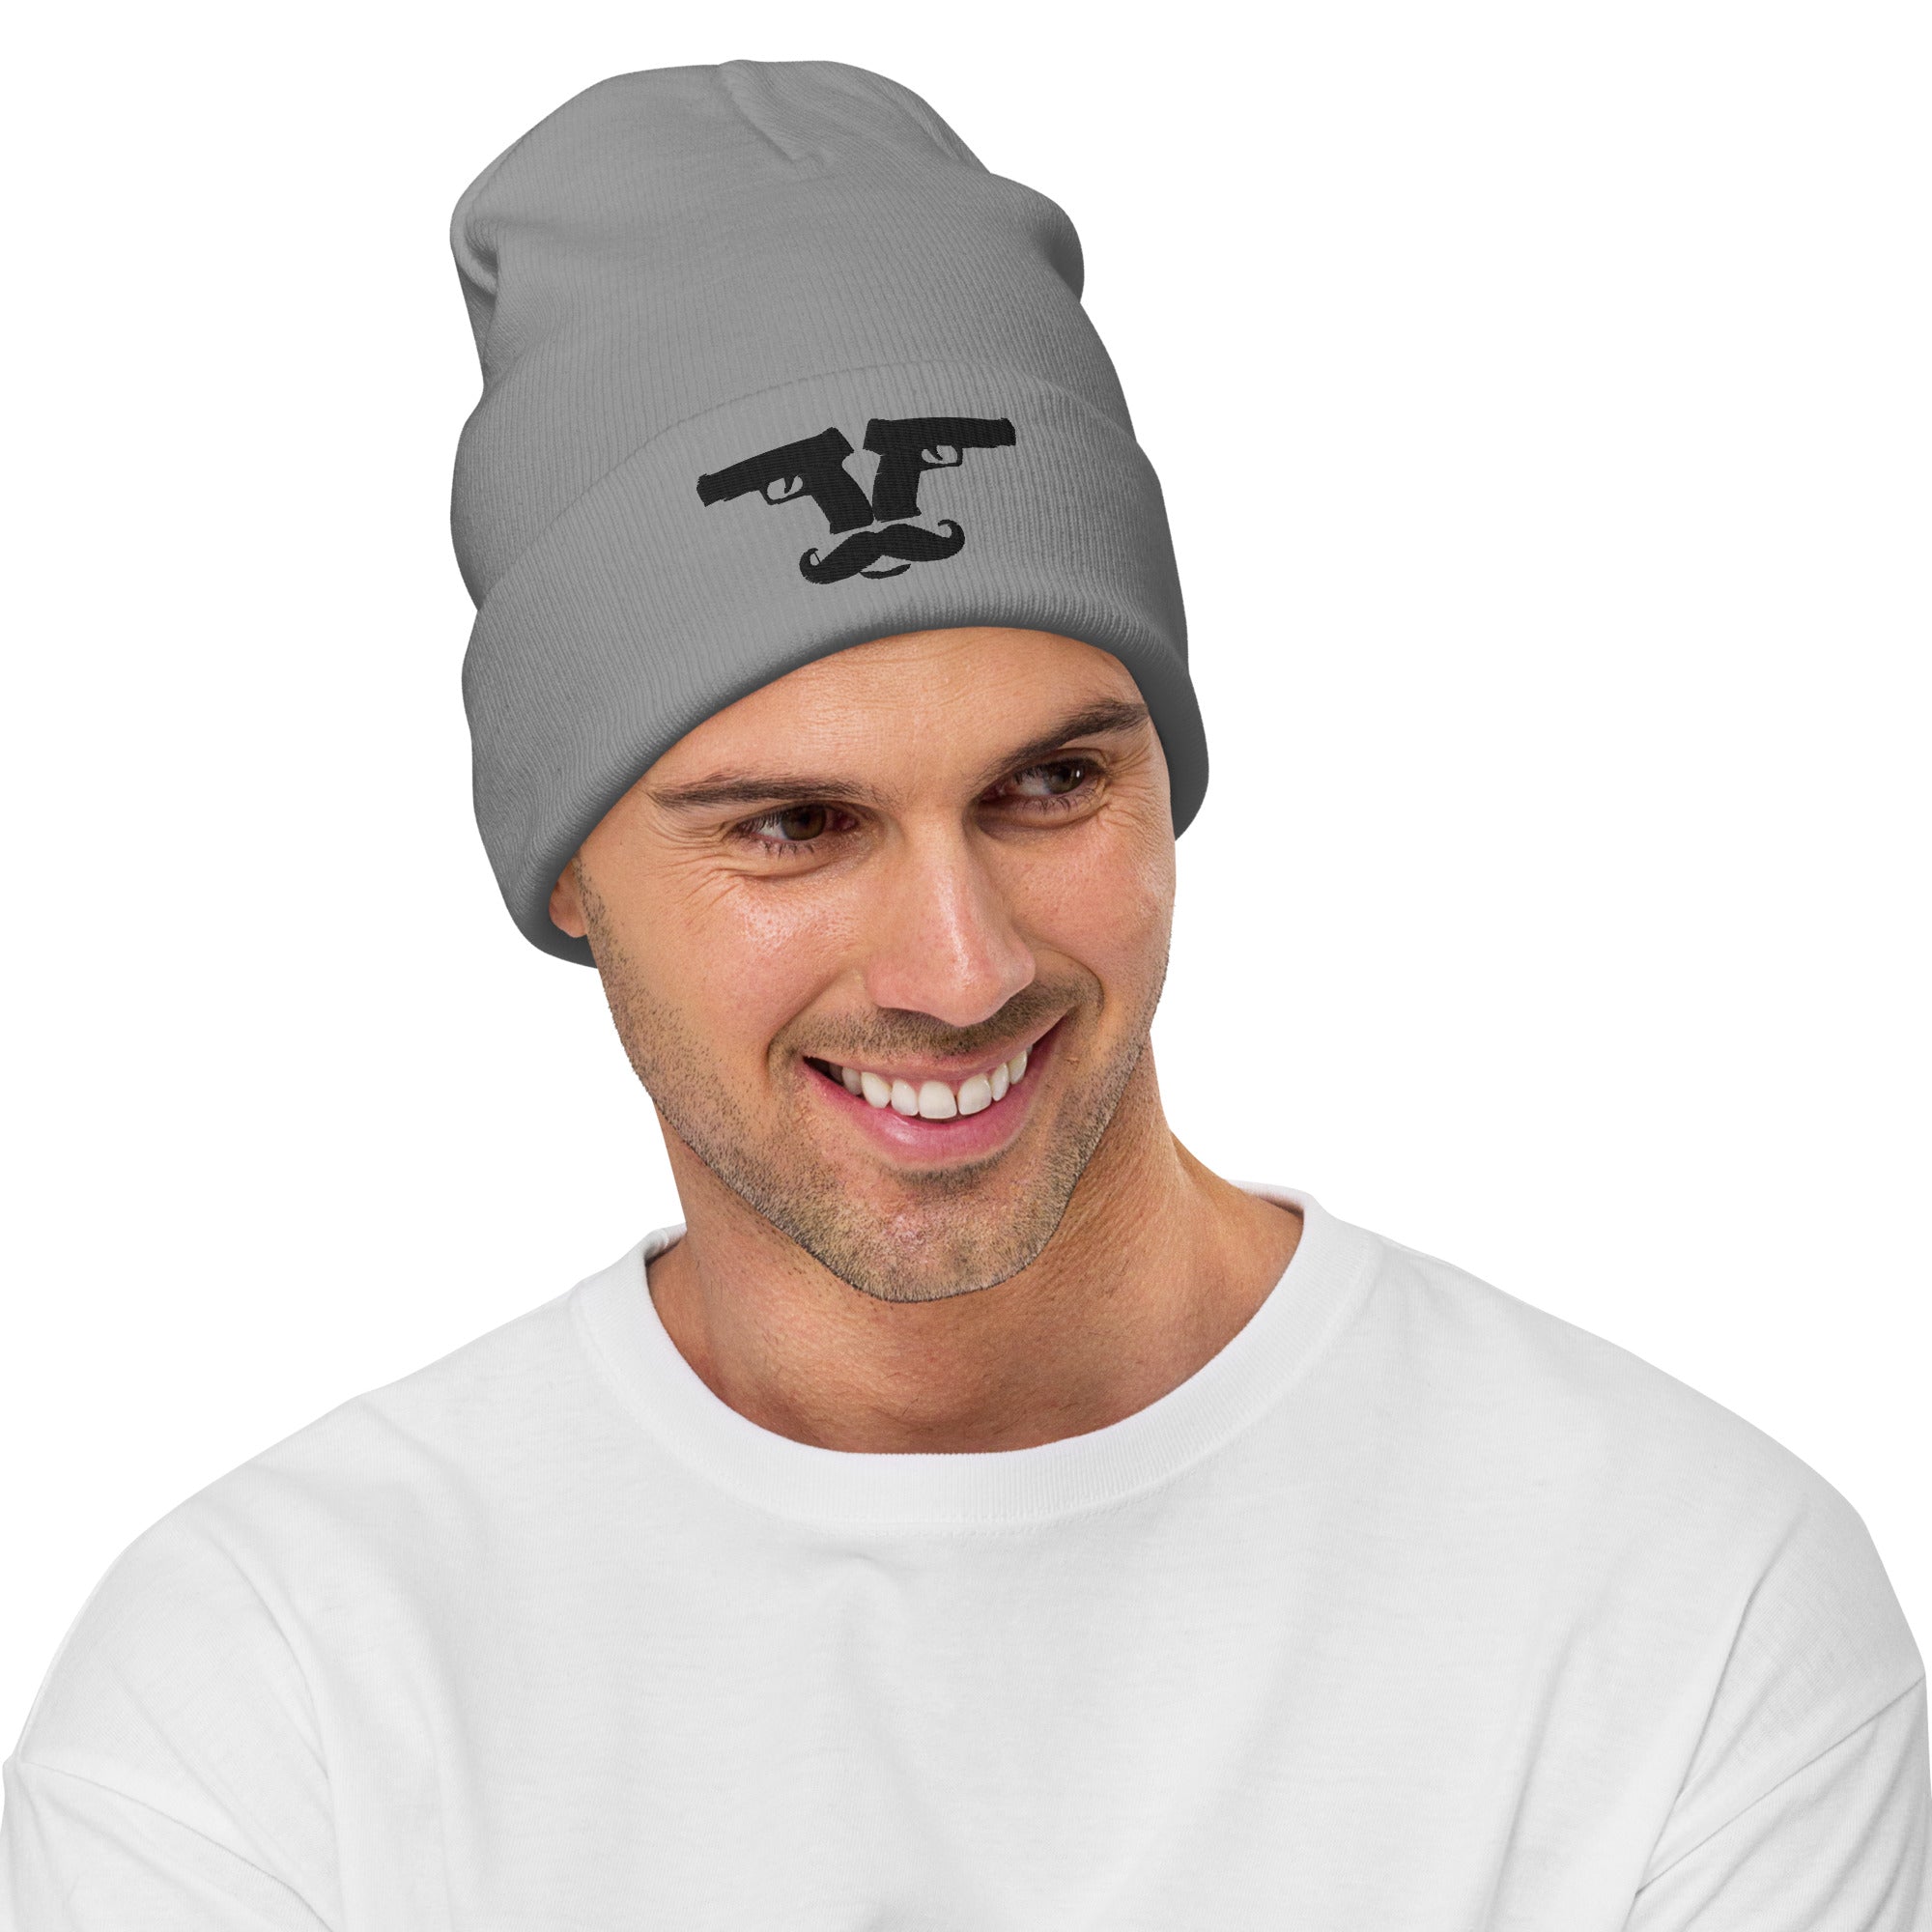 Guns Out - Embroidered Beanie (light)